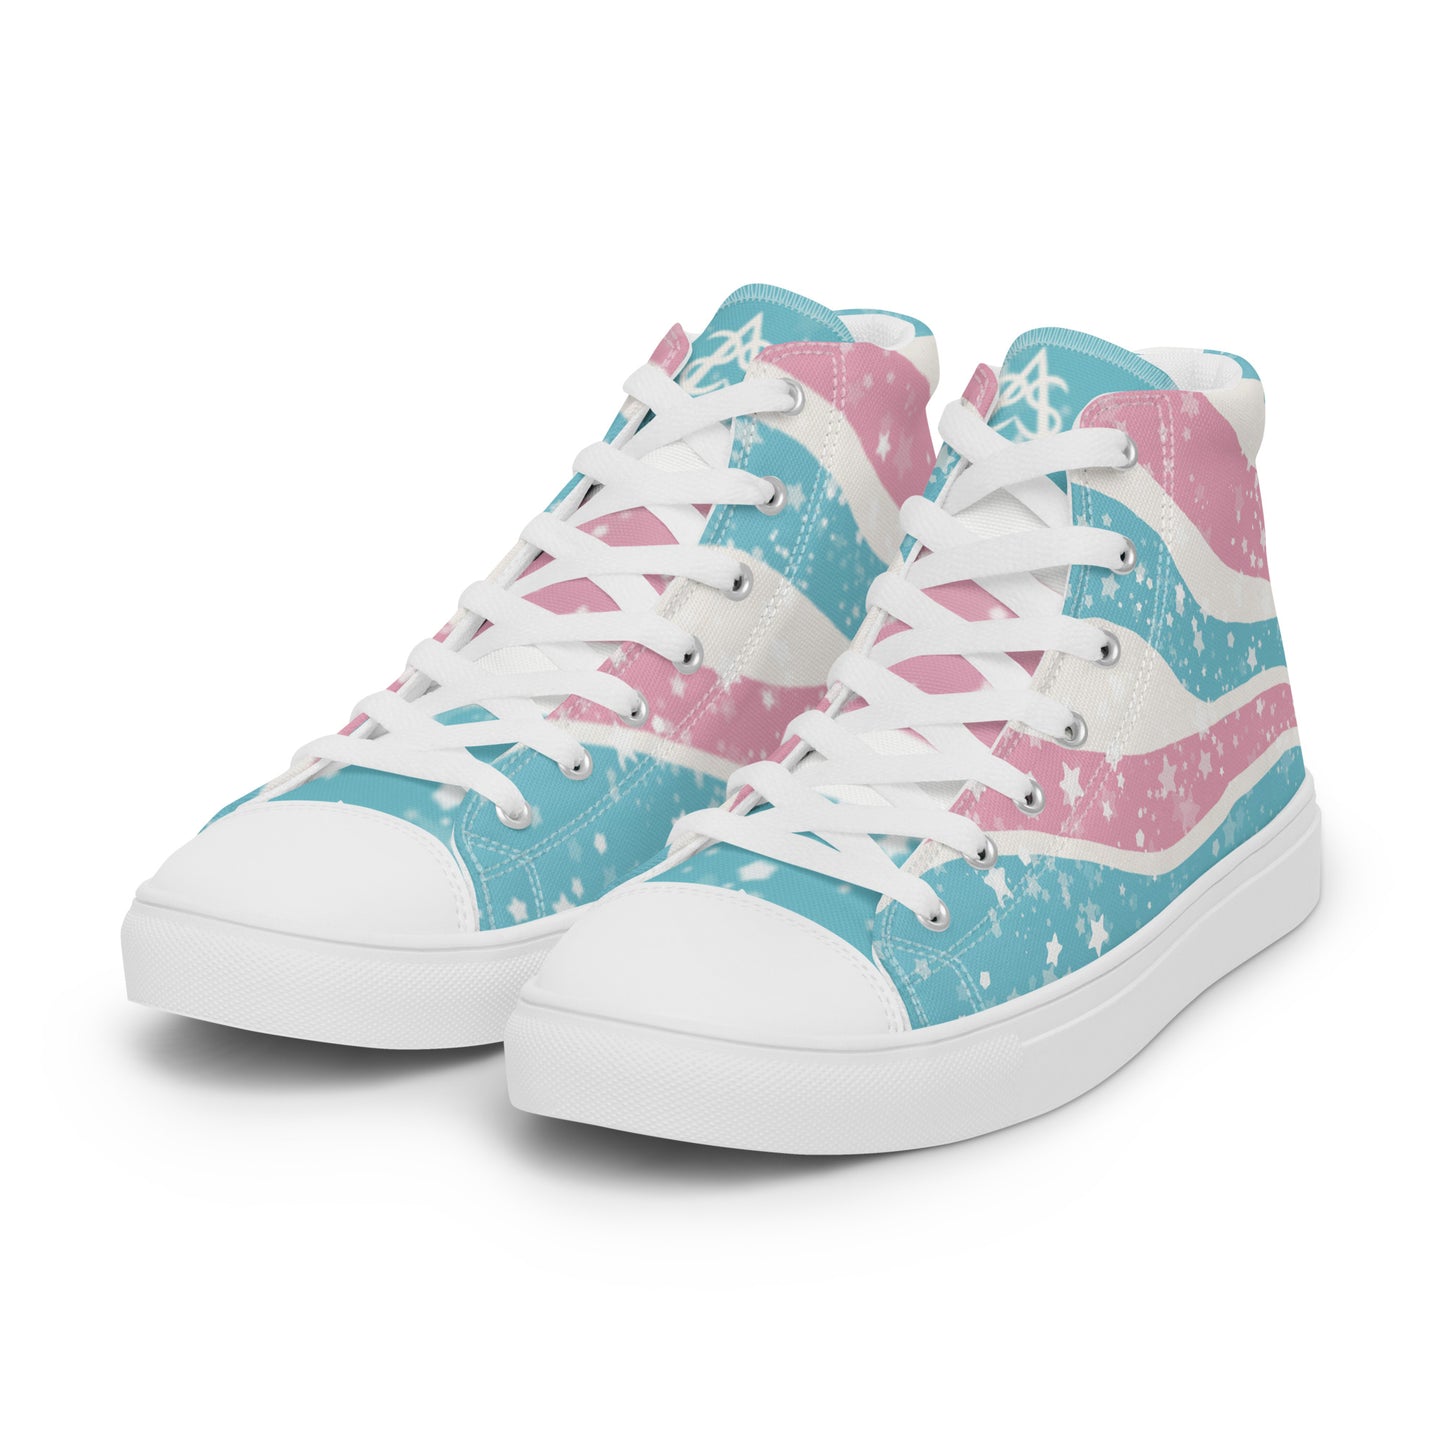 Left front view: A pair of high top shoes have way lines starting from the heel and getting larger towards the laces in pink, white, and blue with white stars all over, white laces, and white details.